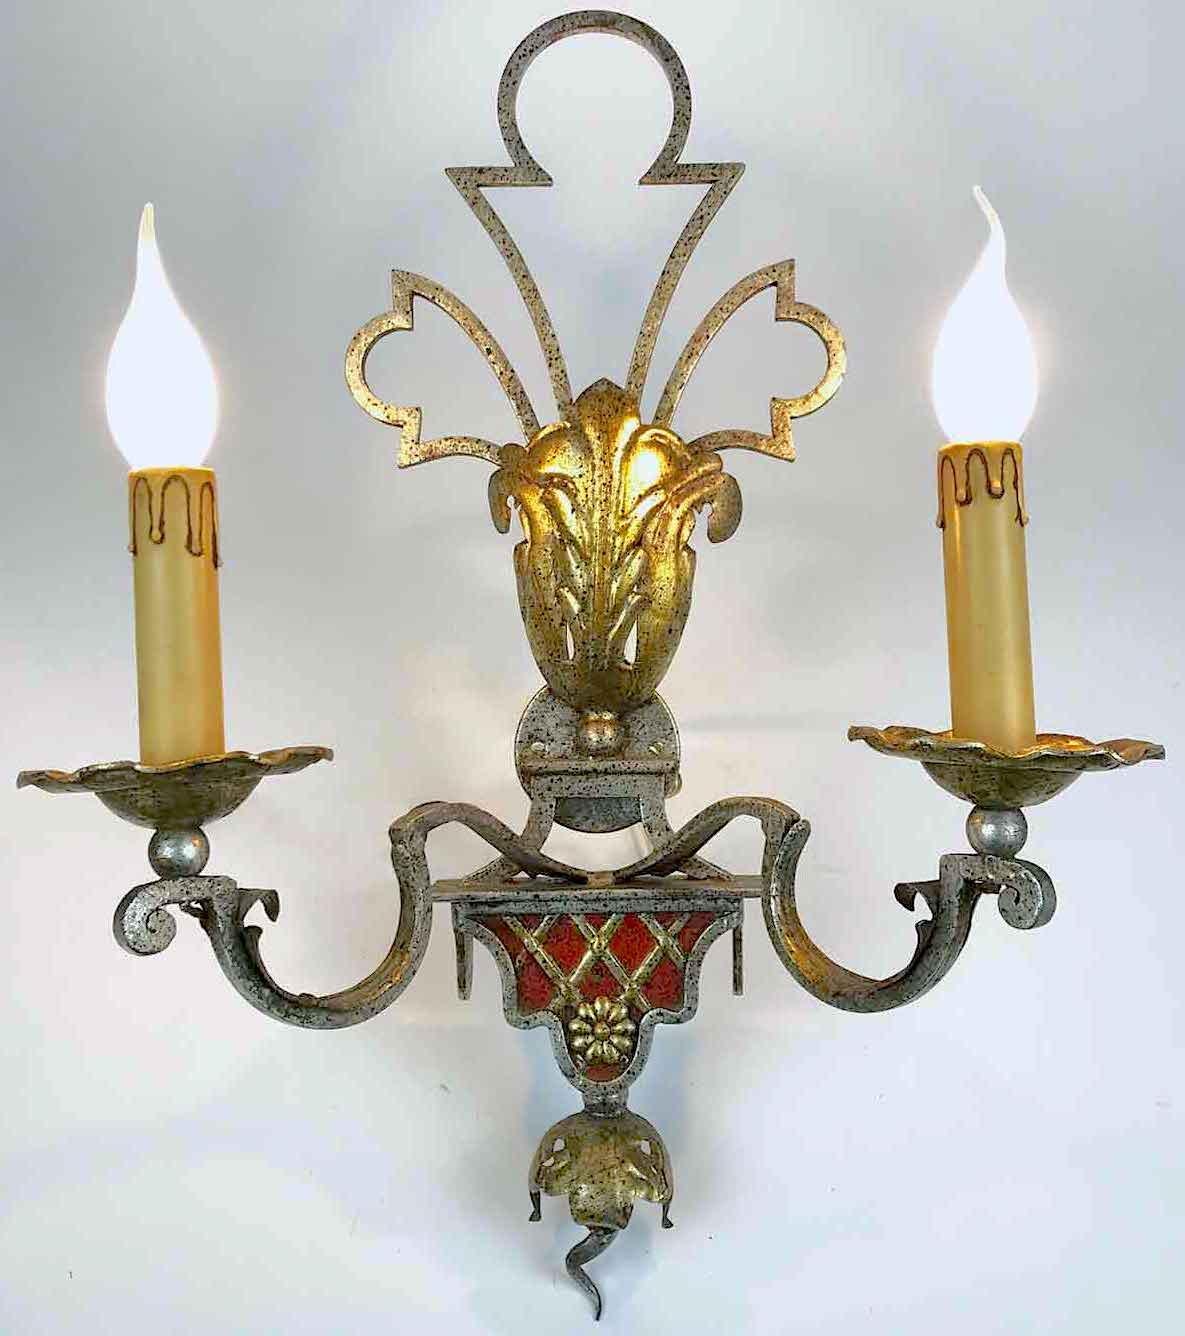 Late 20th century Italian iron sconces, a pair of silver-leaf and partially gilt two-light sconces by Banci, manufactured by Banci Firenze in the Renaissance style, decorated with red accents and geometrical stylized pattern in the lower part